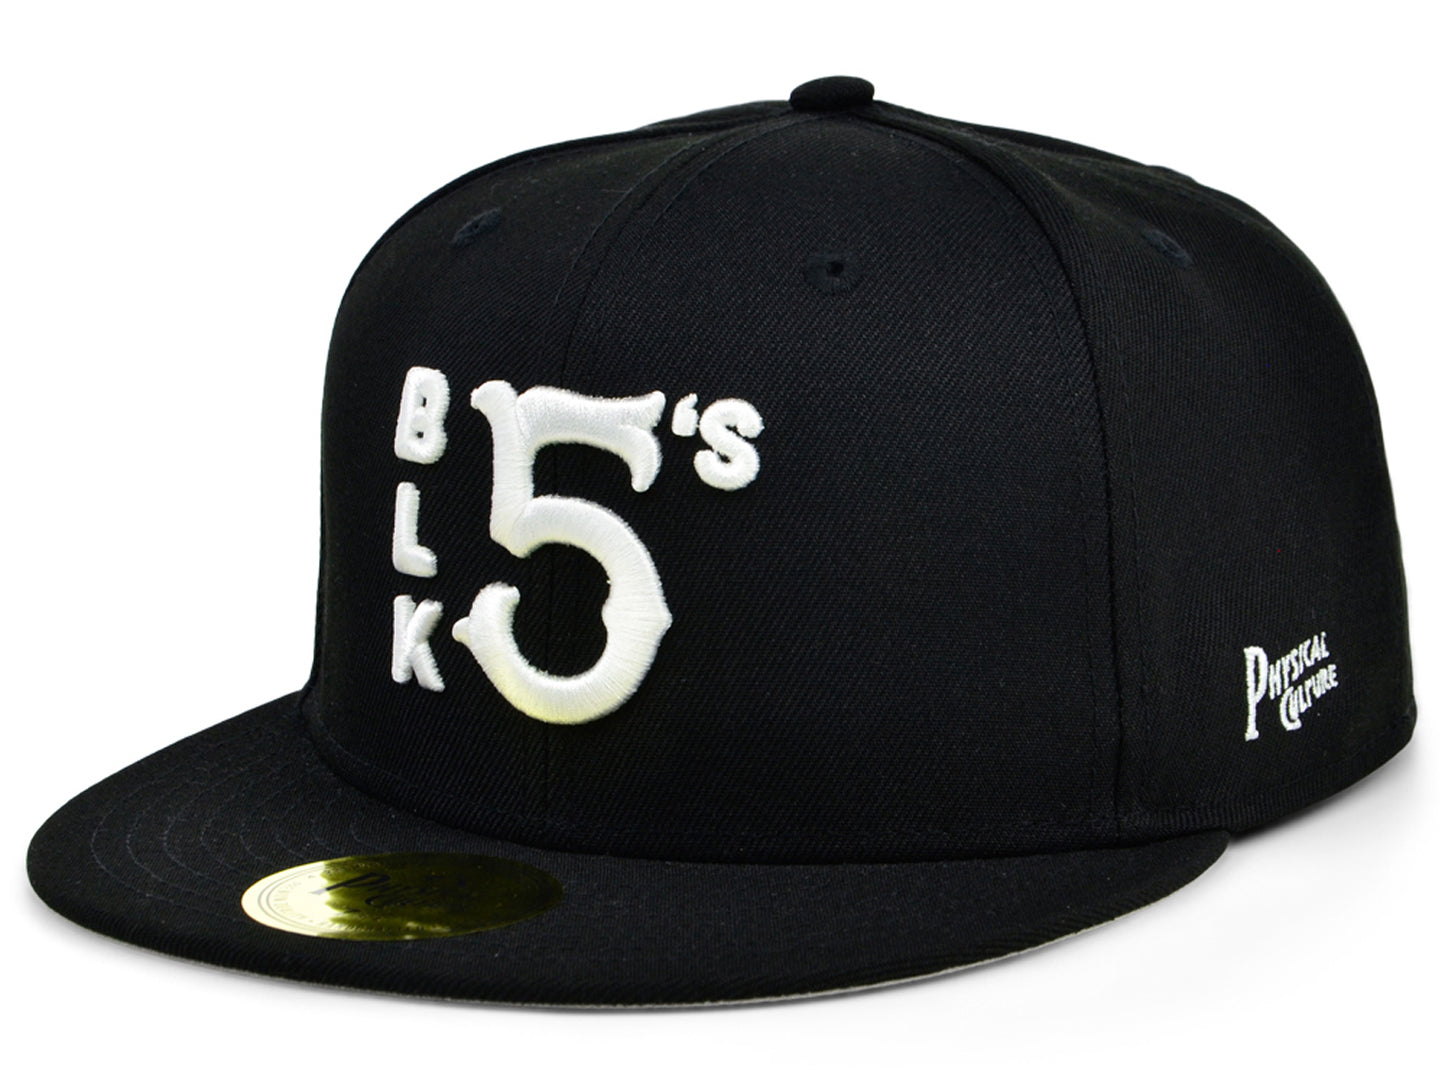 Black Fives BLK 5's Fitted Cap